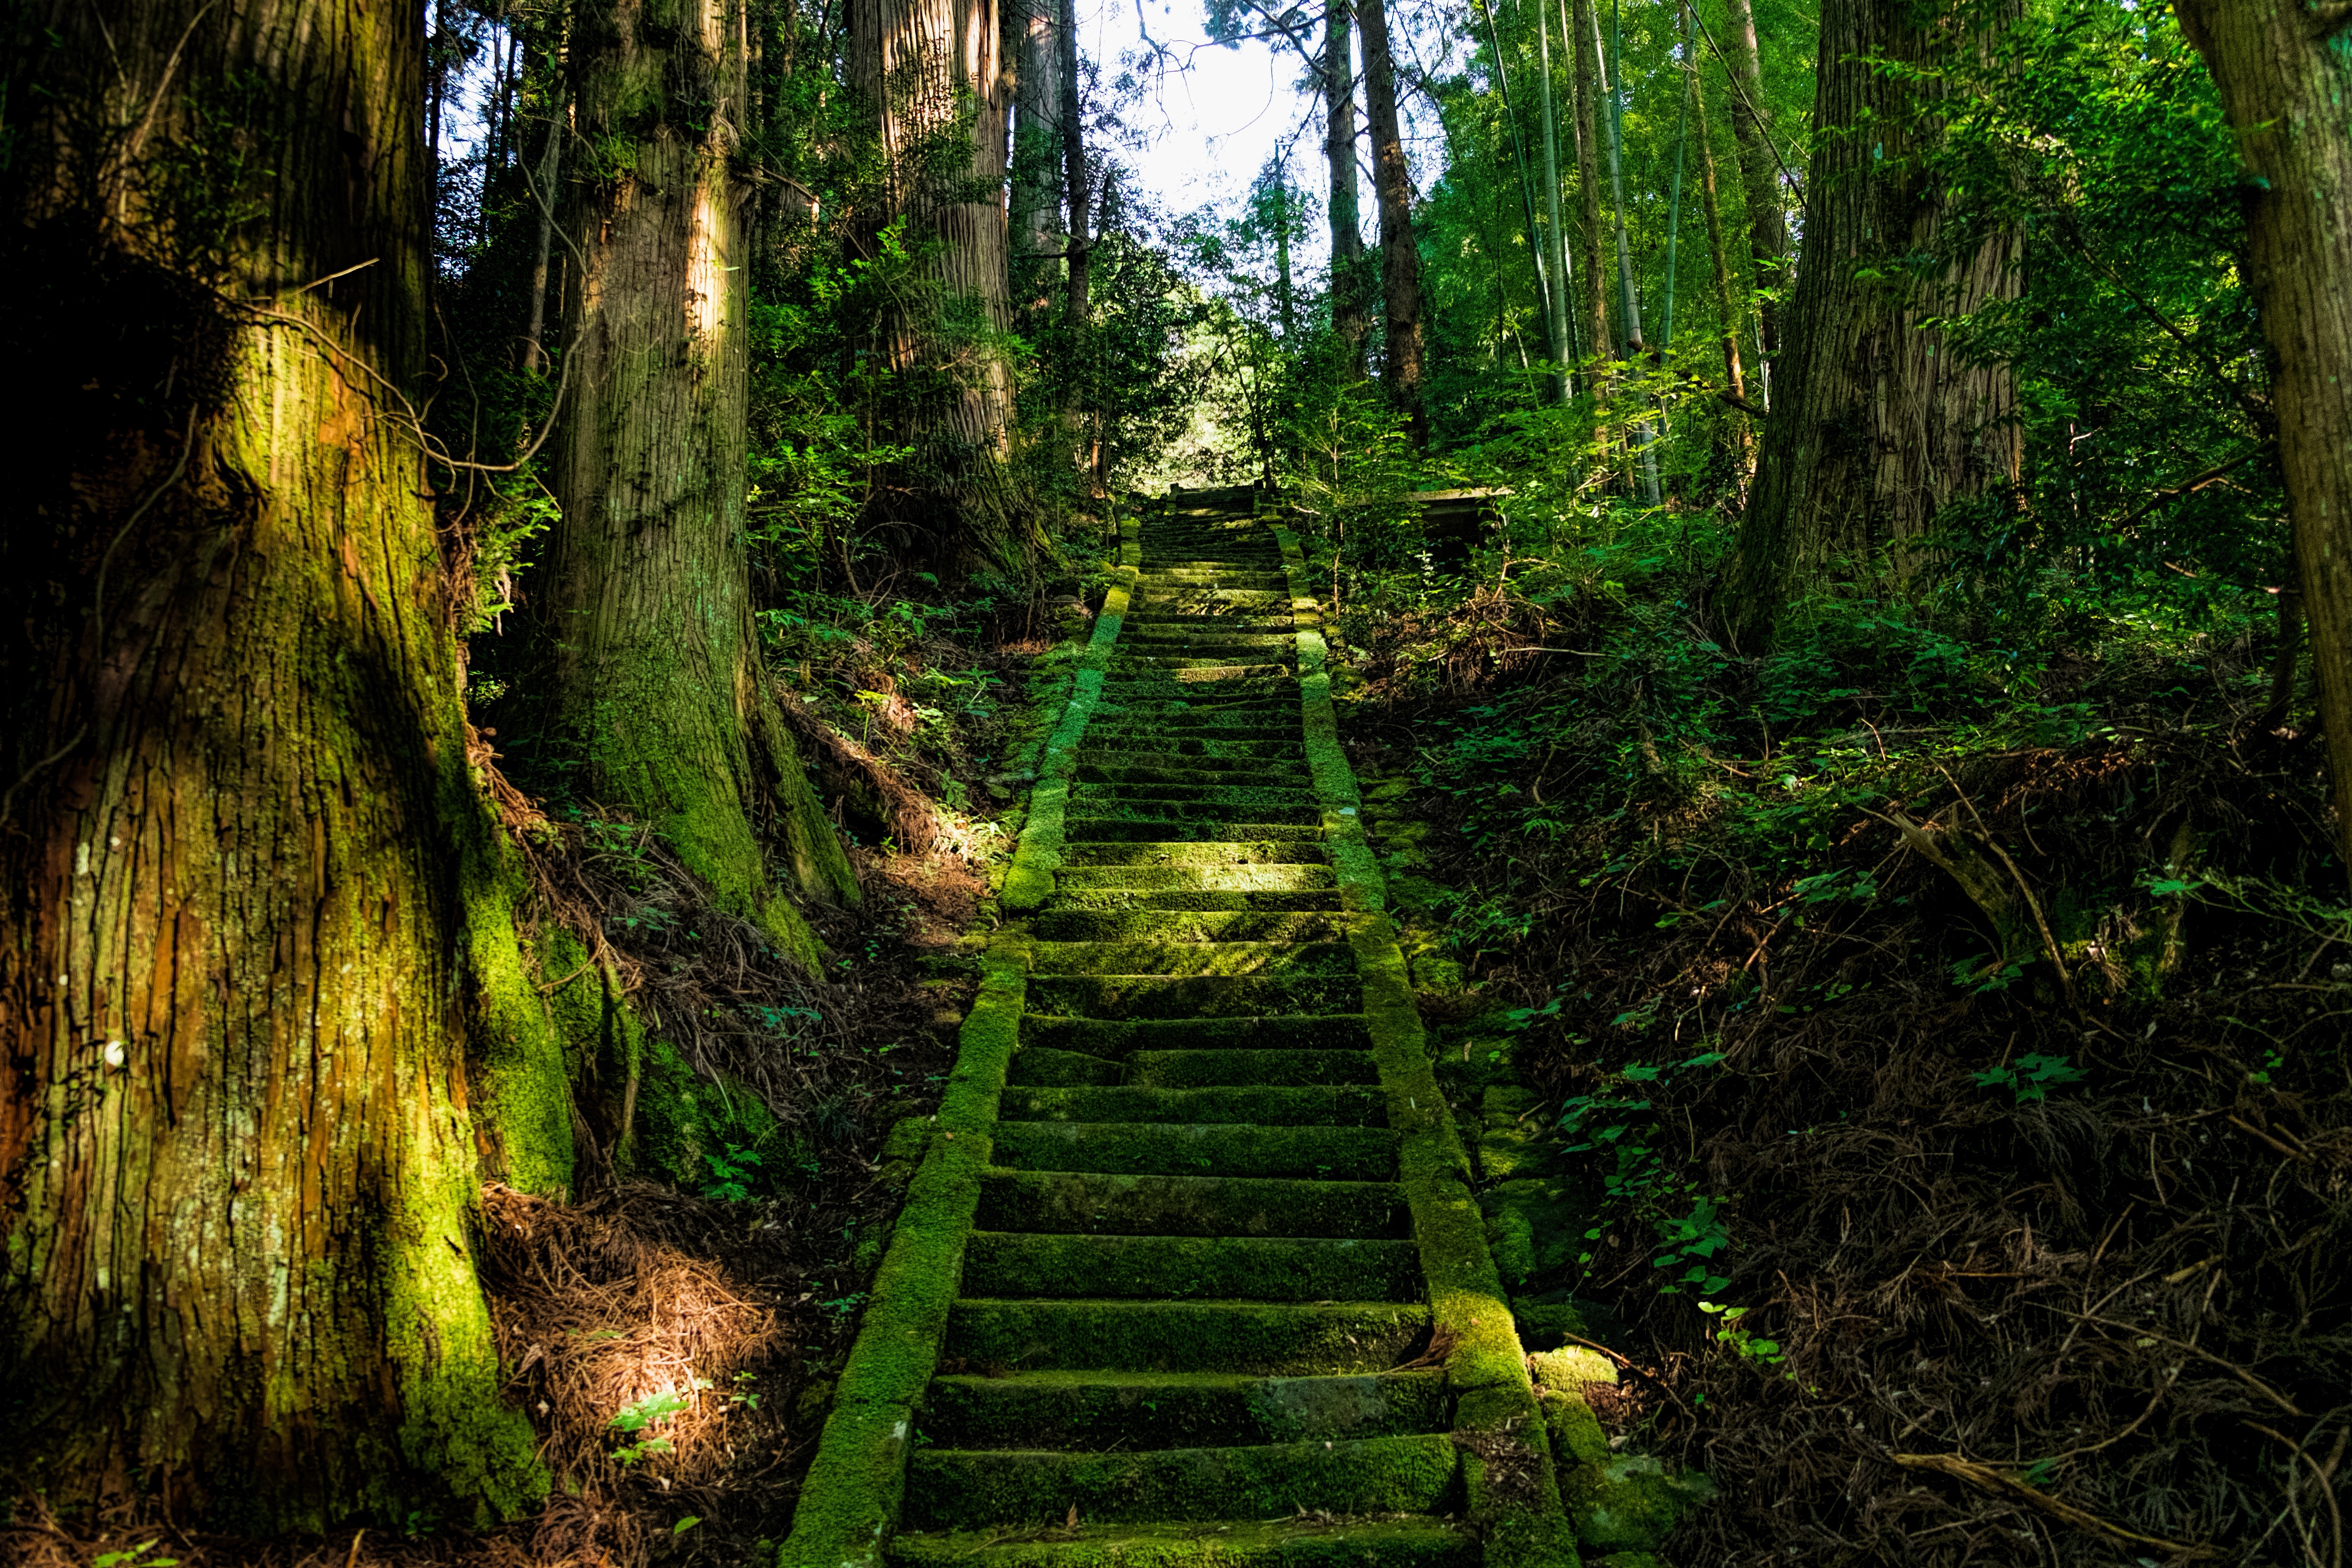 japan, stairs, nature, trees, ladder, moss iphone wallpaper